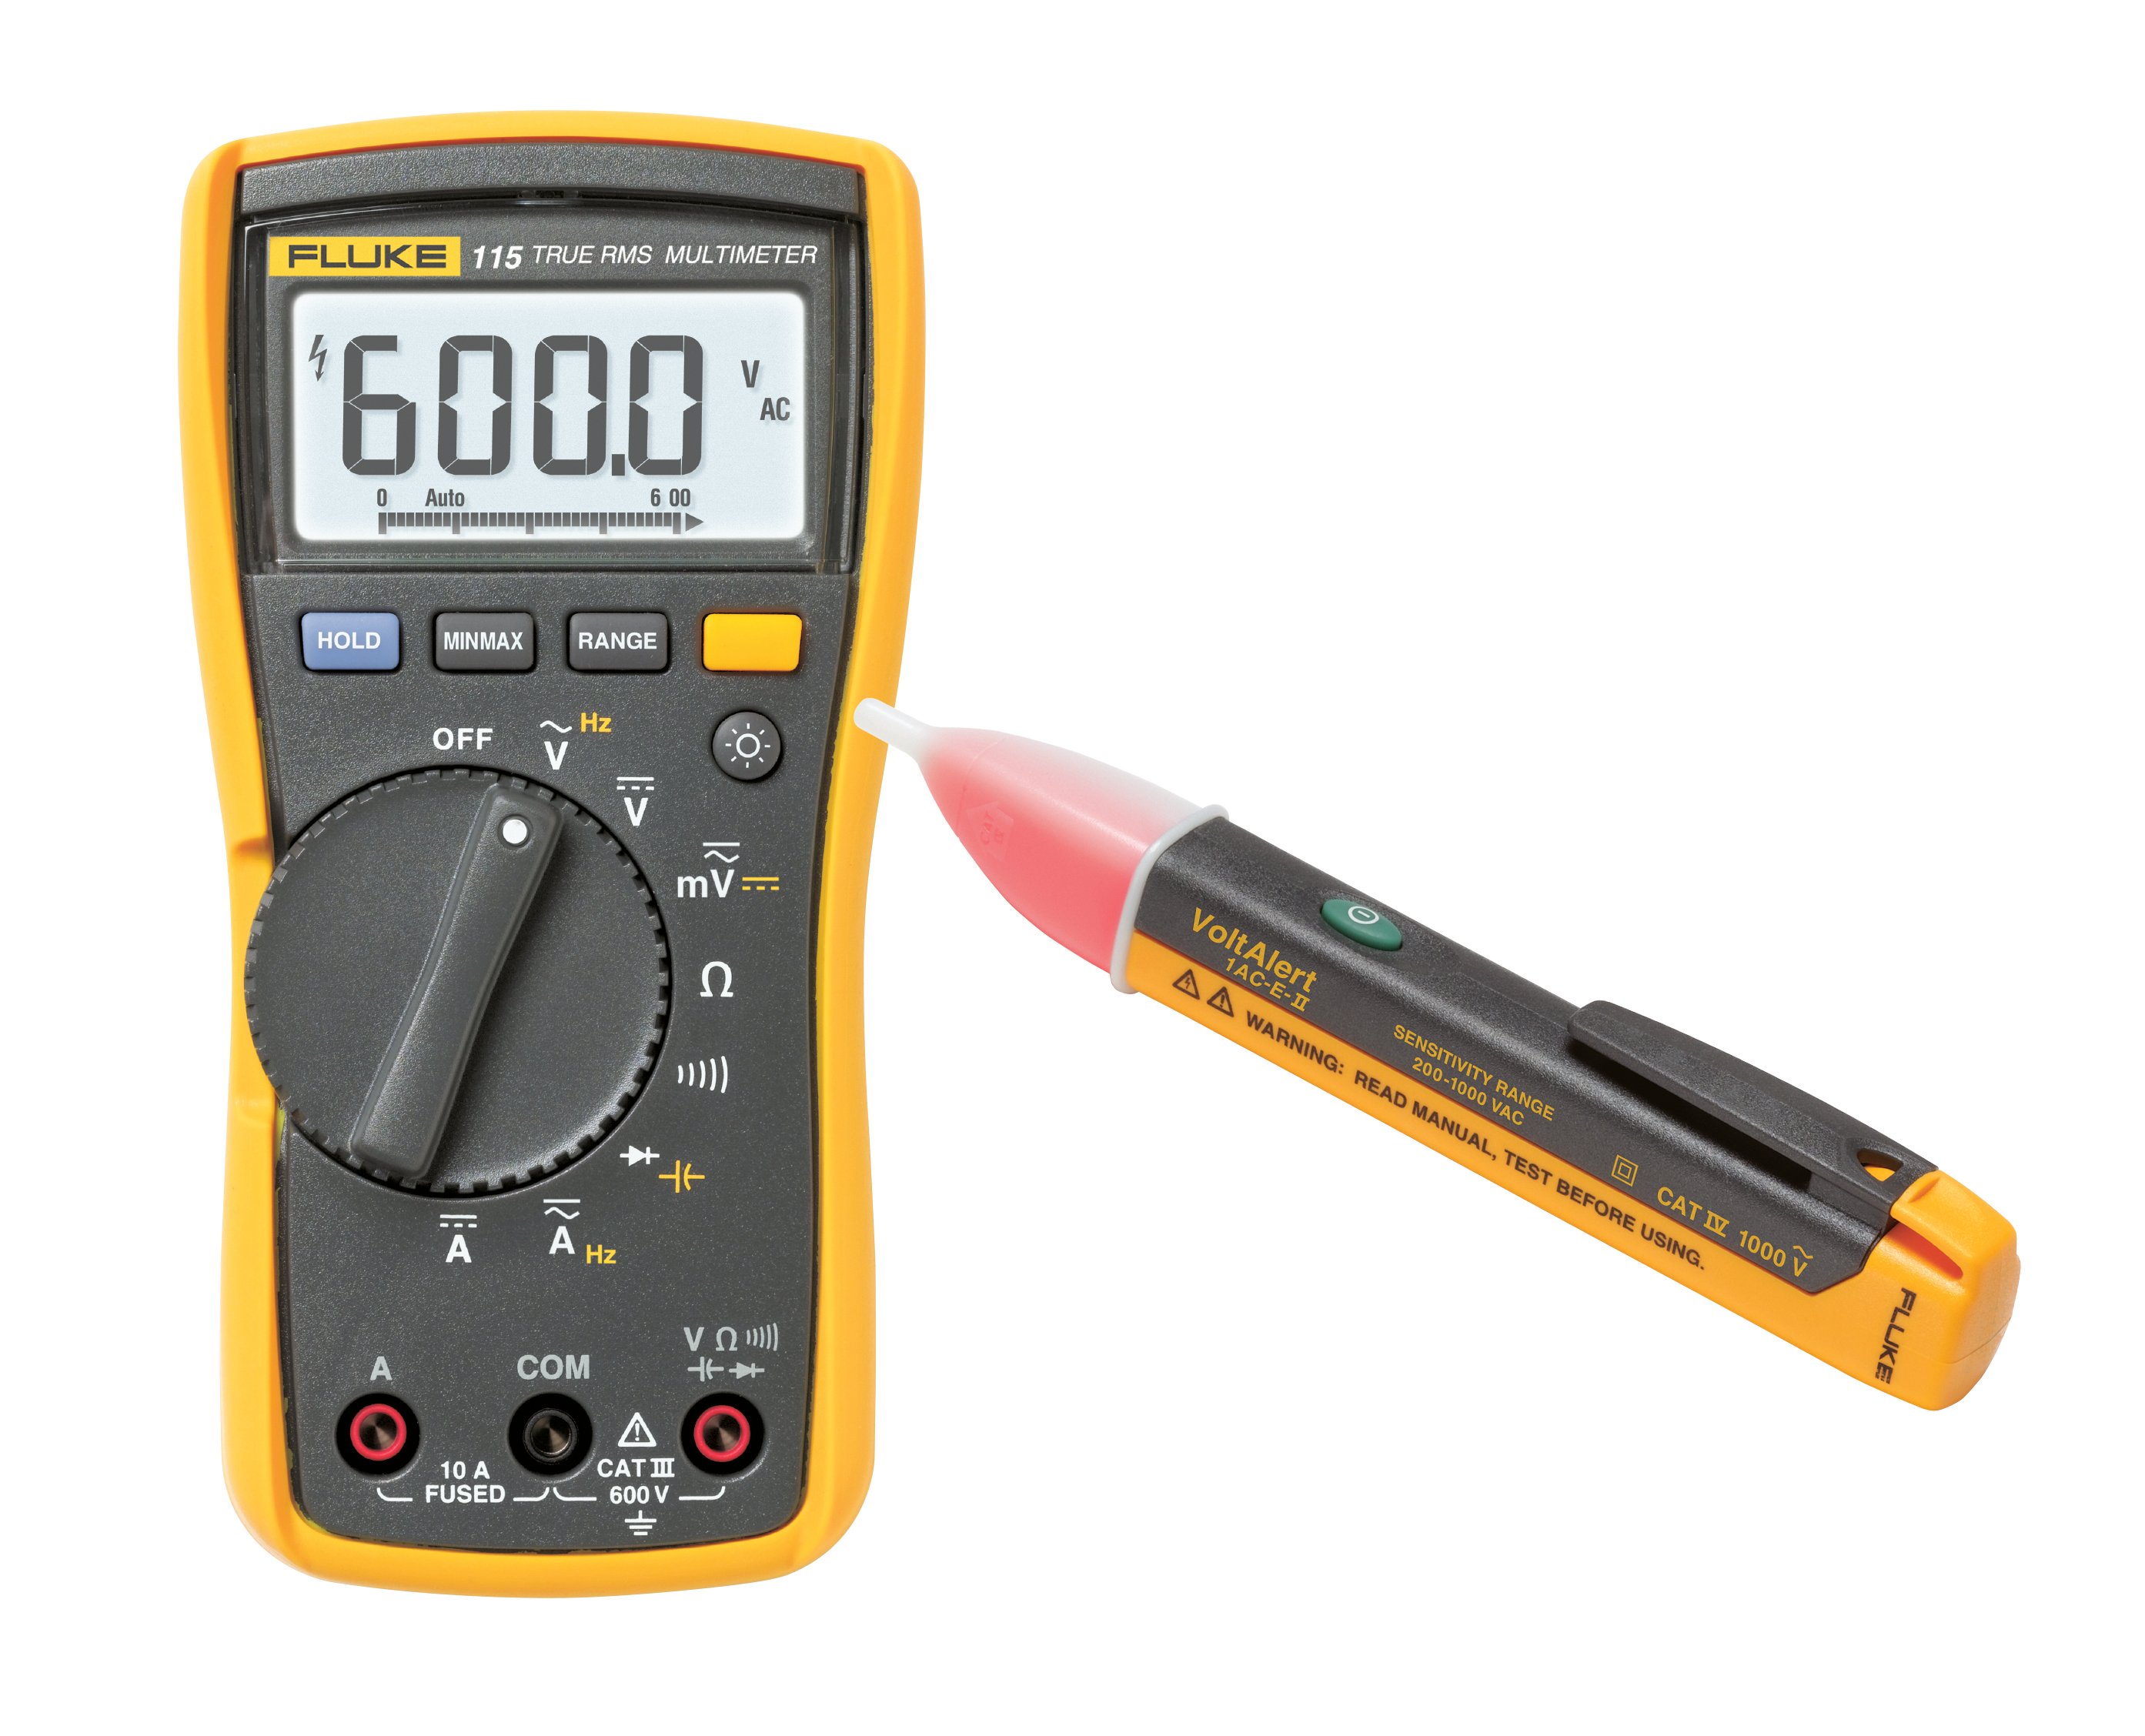 Fluke 115 Digital Multimeter – with a FREE 1ACII Non-Contact Voltage Tester